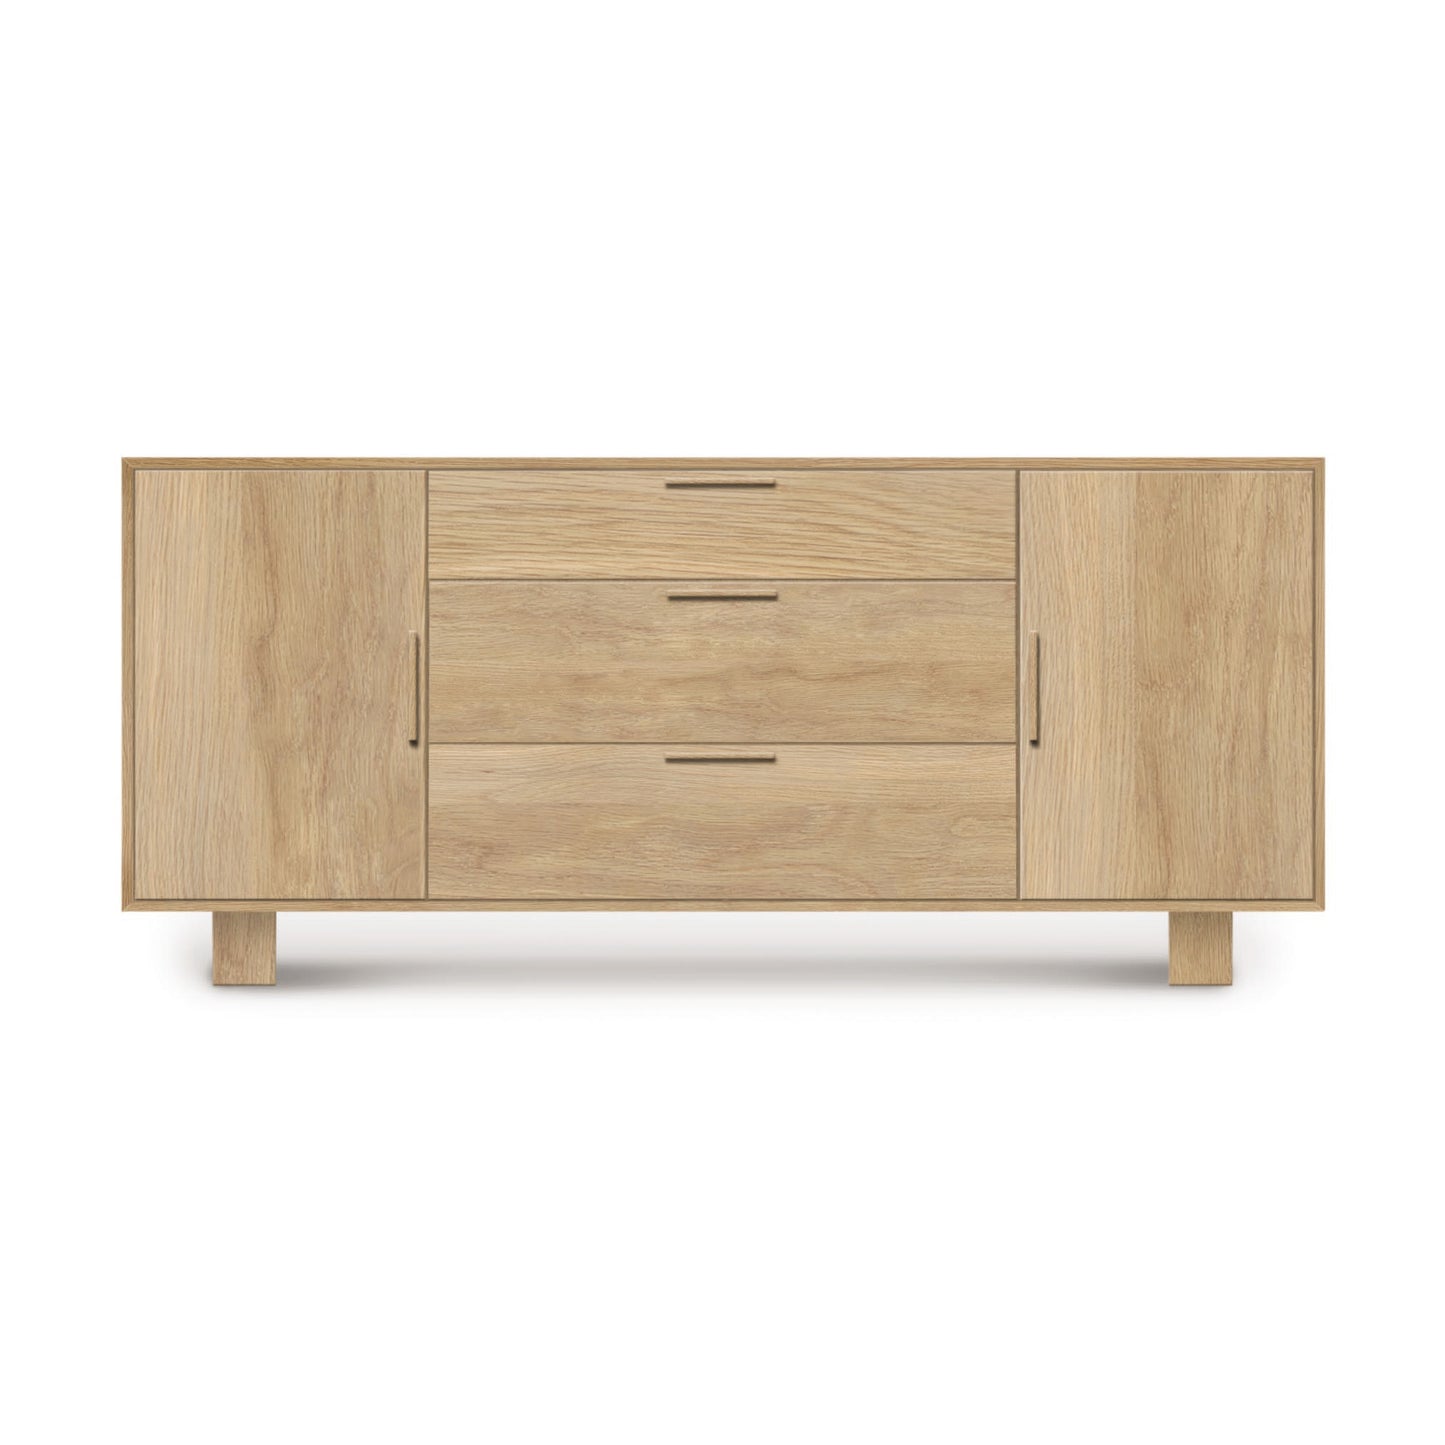 A Copeland Furniture Iso 2 Door, 3 Side Drawer Buffet, set against a white background.